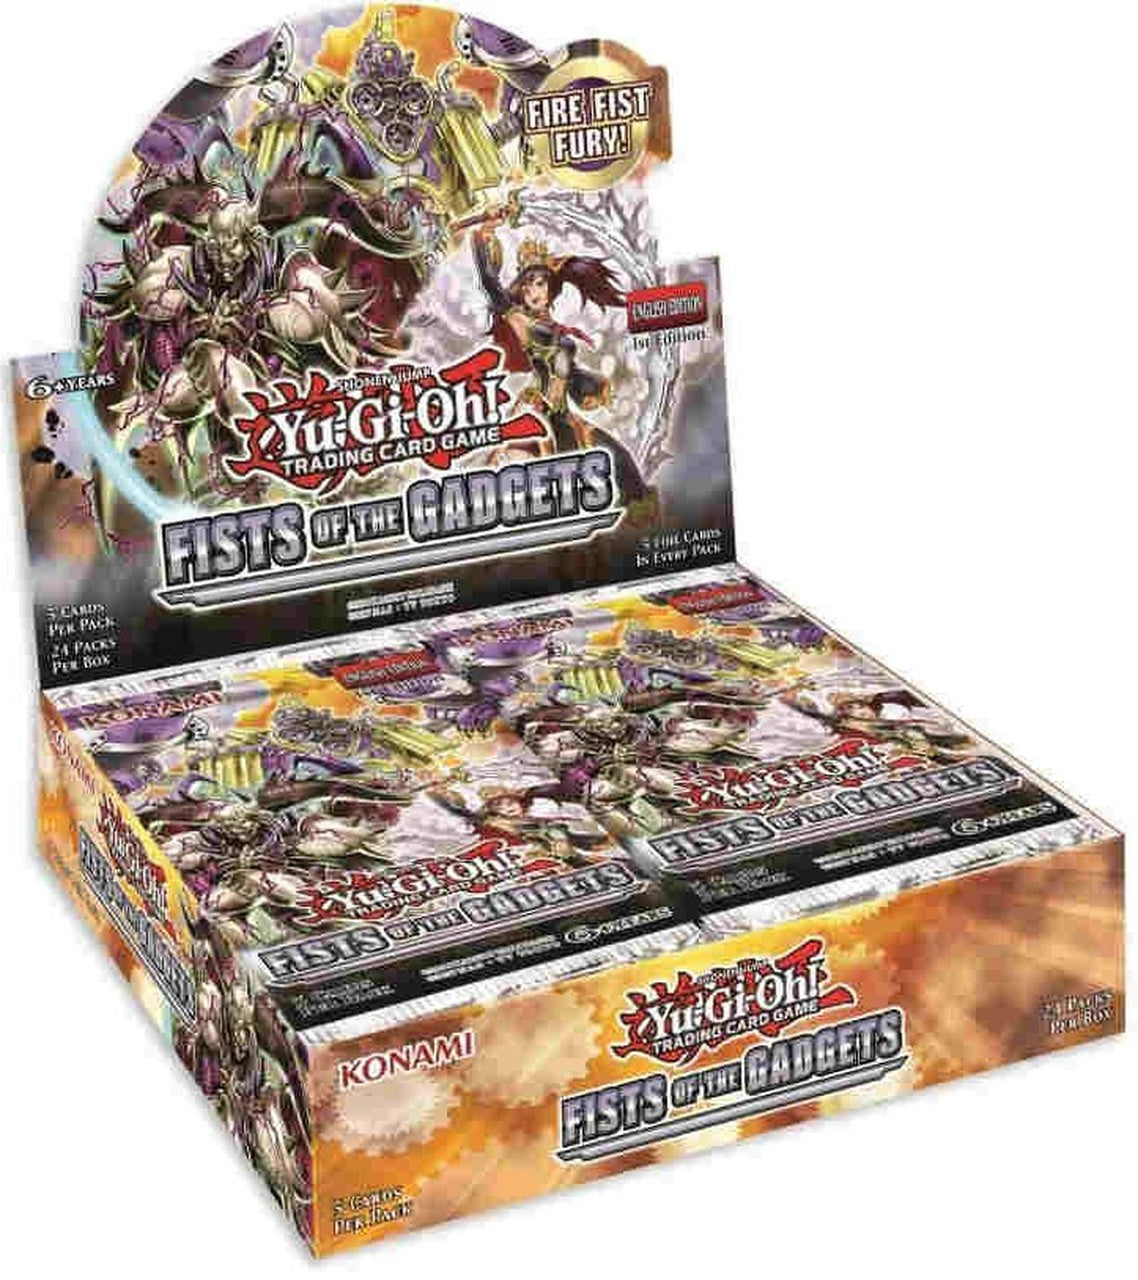 Yugioh Fists of the Gadgets Booster box | Boutique FDB